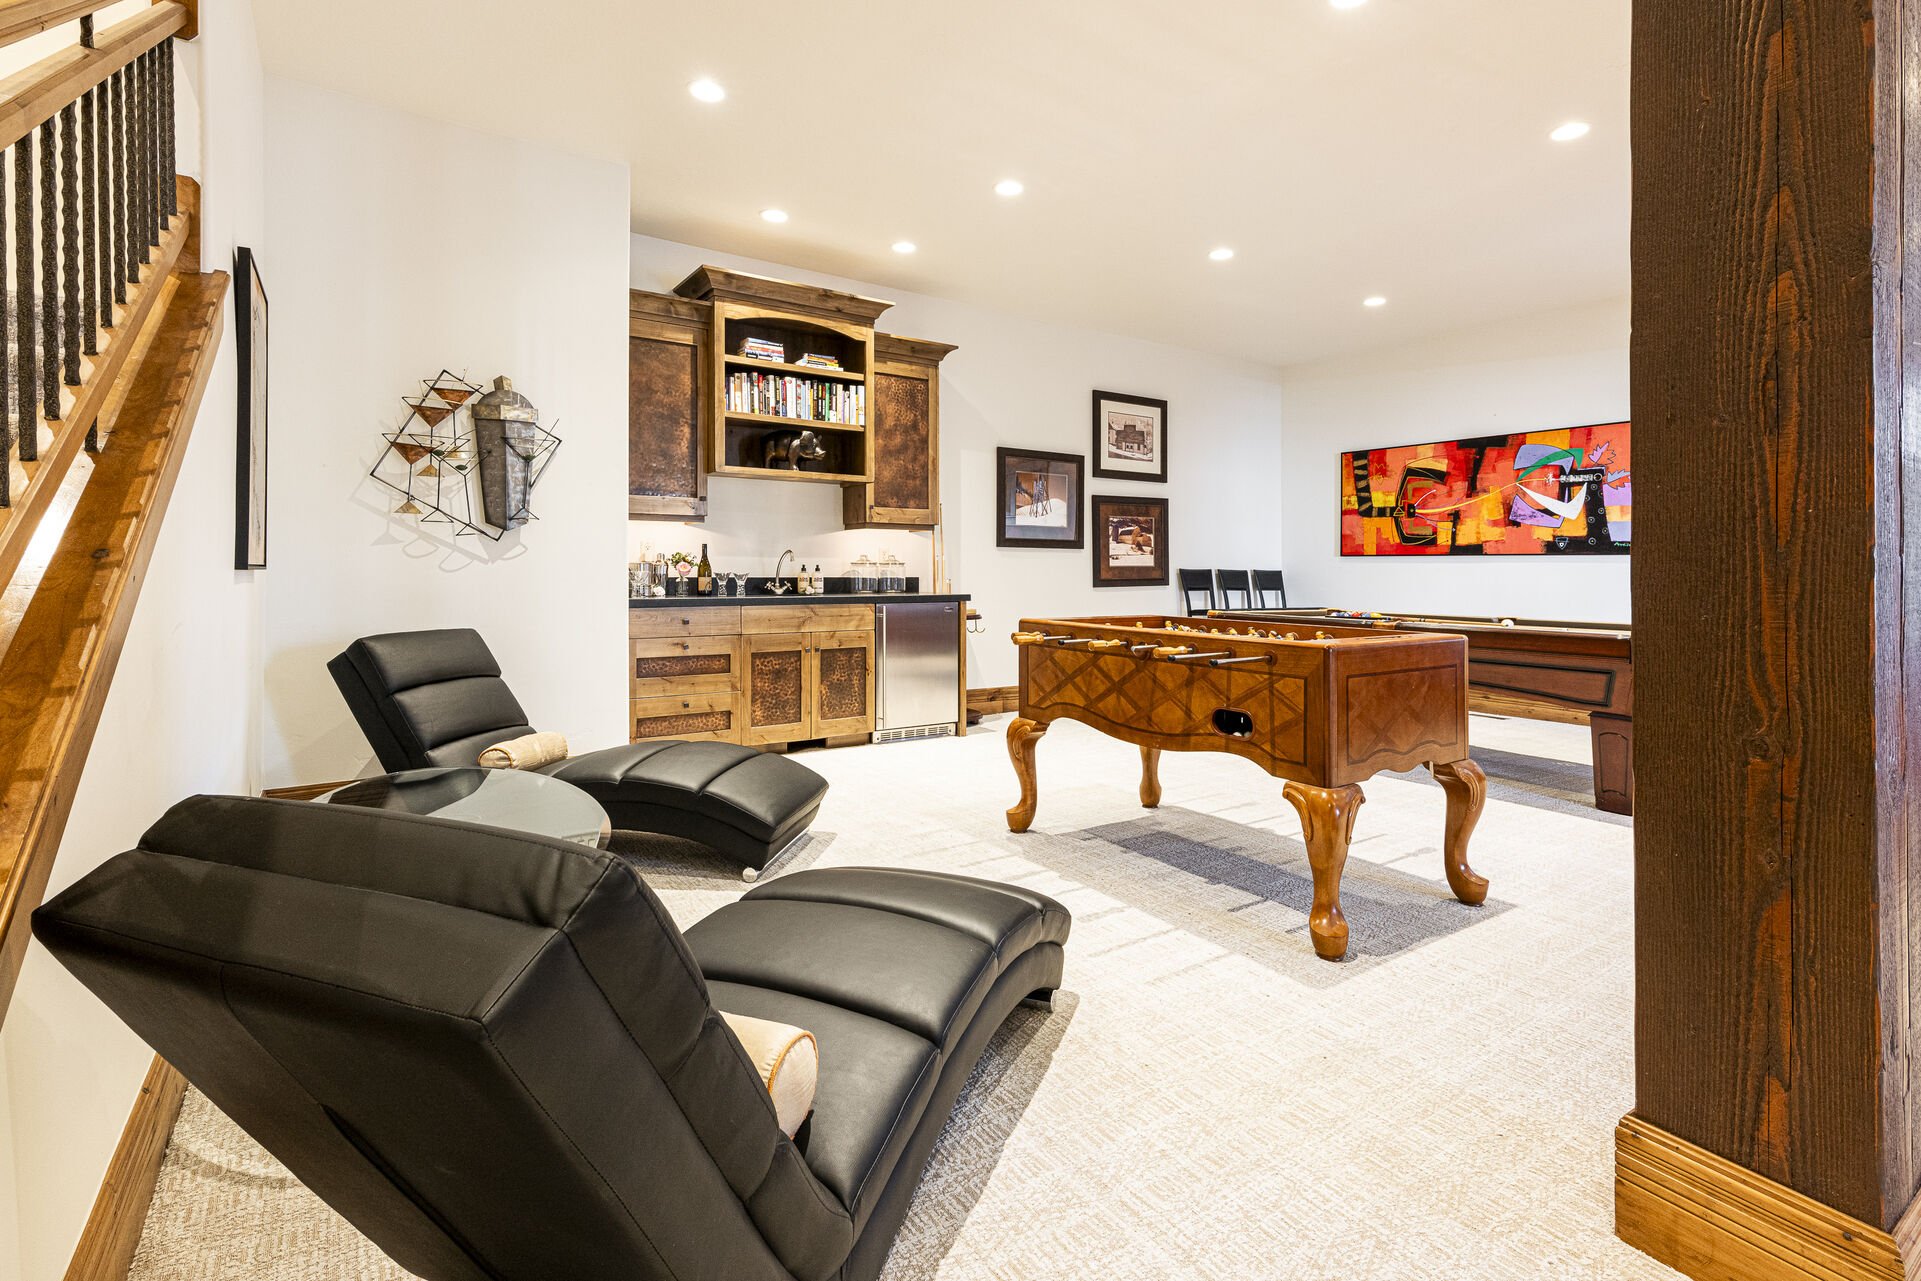 Game/Family Room with Plenty of Seating